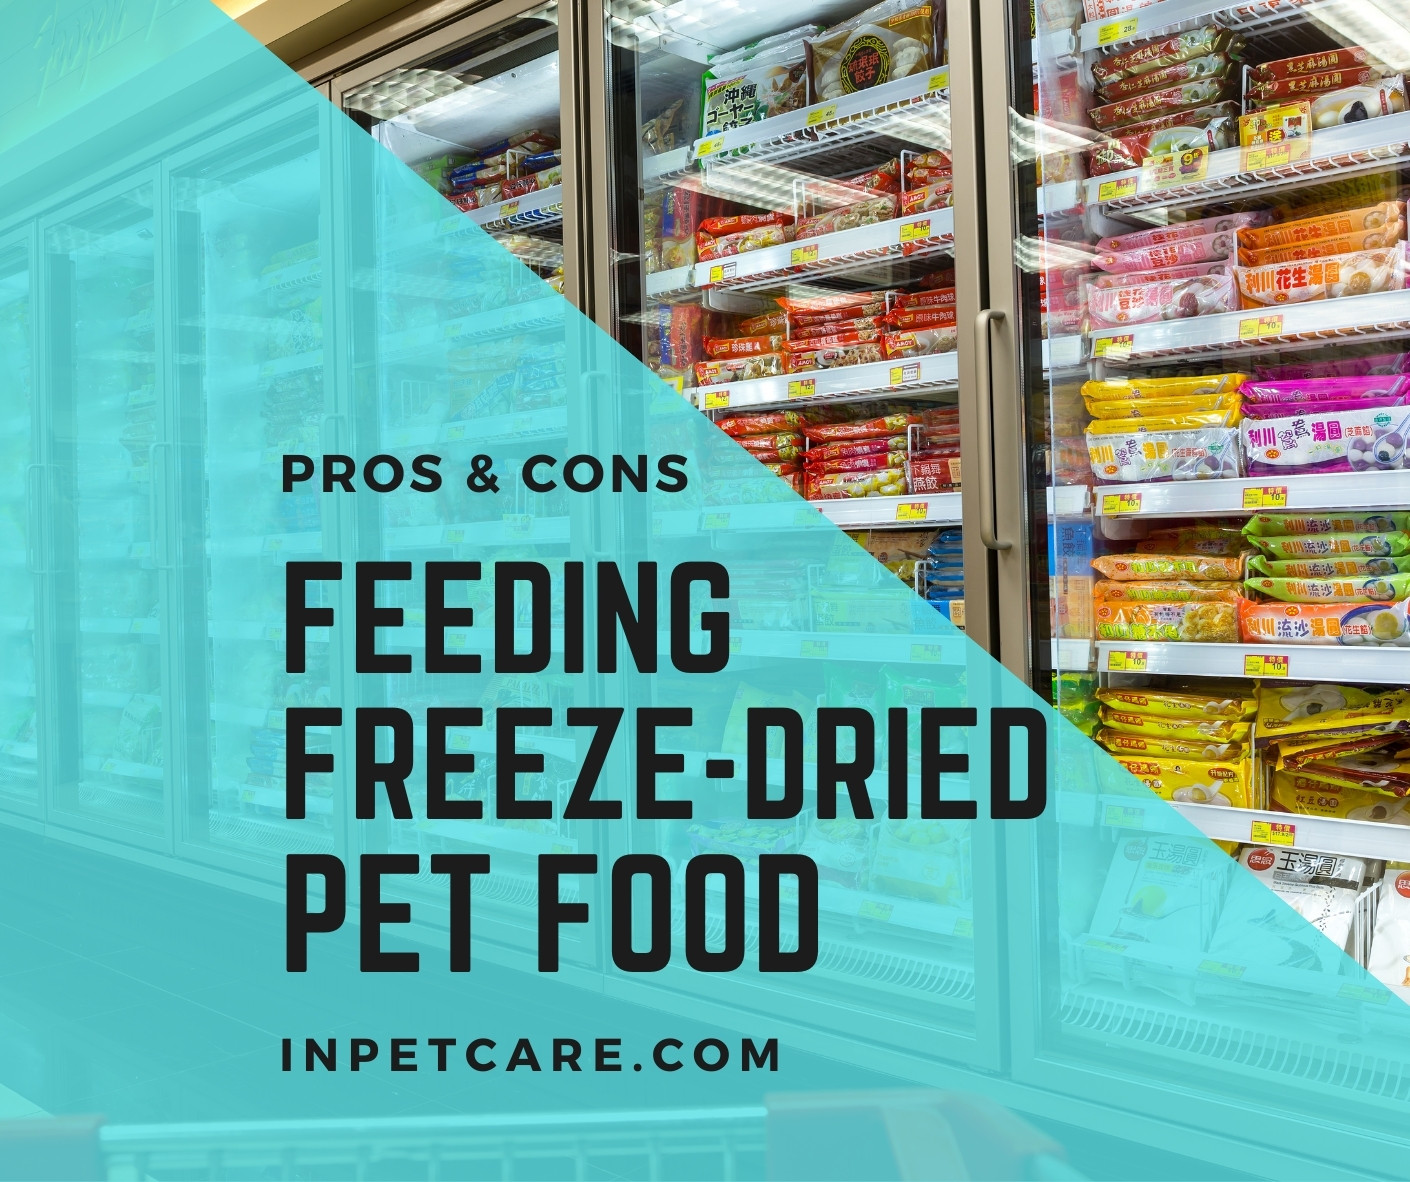 Should You Feed Freeze-Dried Food to Your Pets?